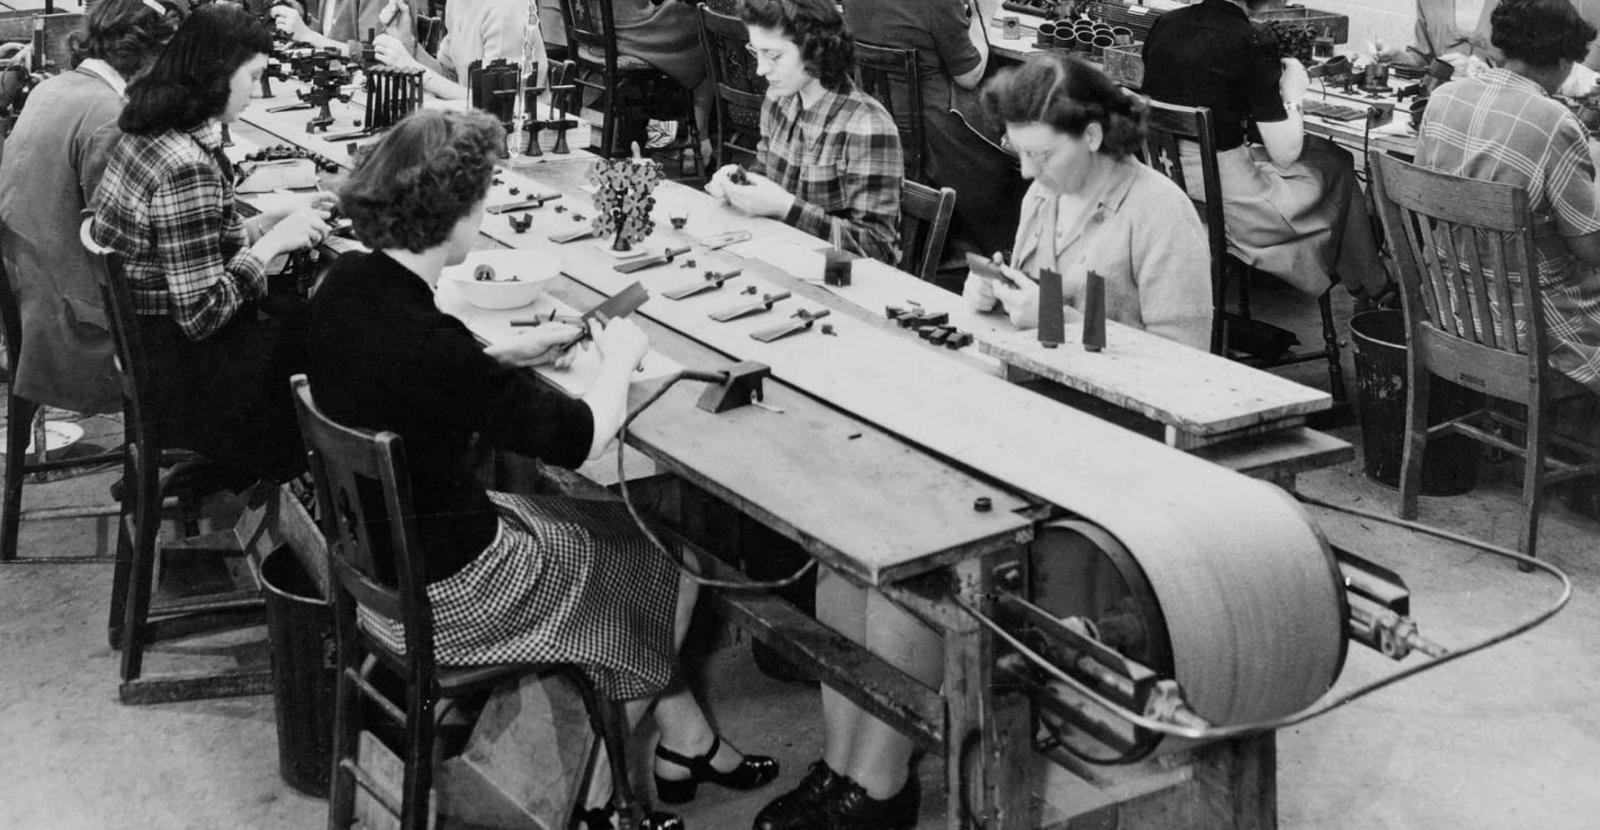 Women at work, sitting at assembly table in 1940s